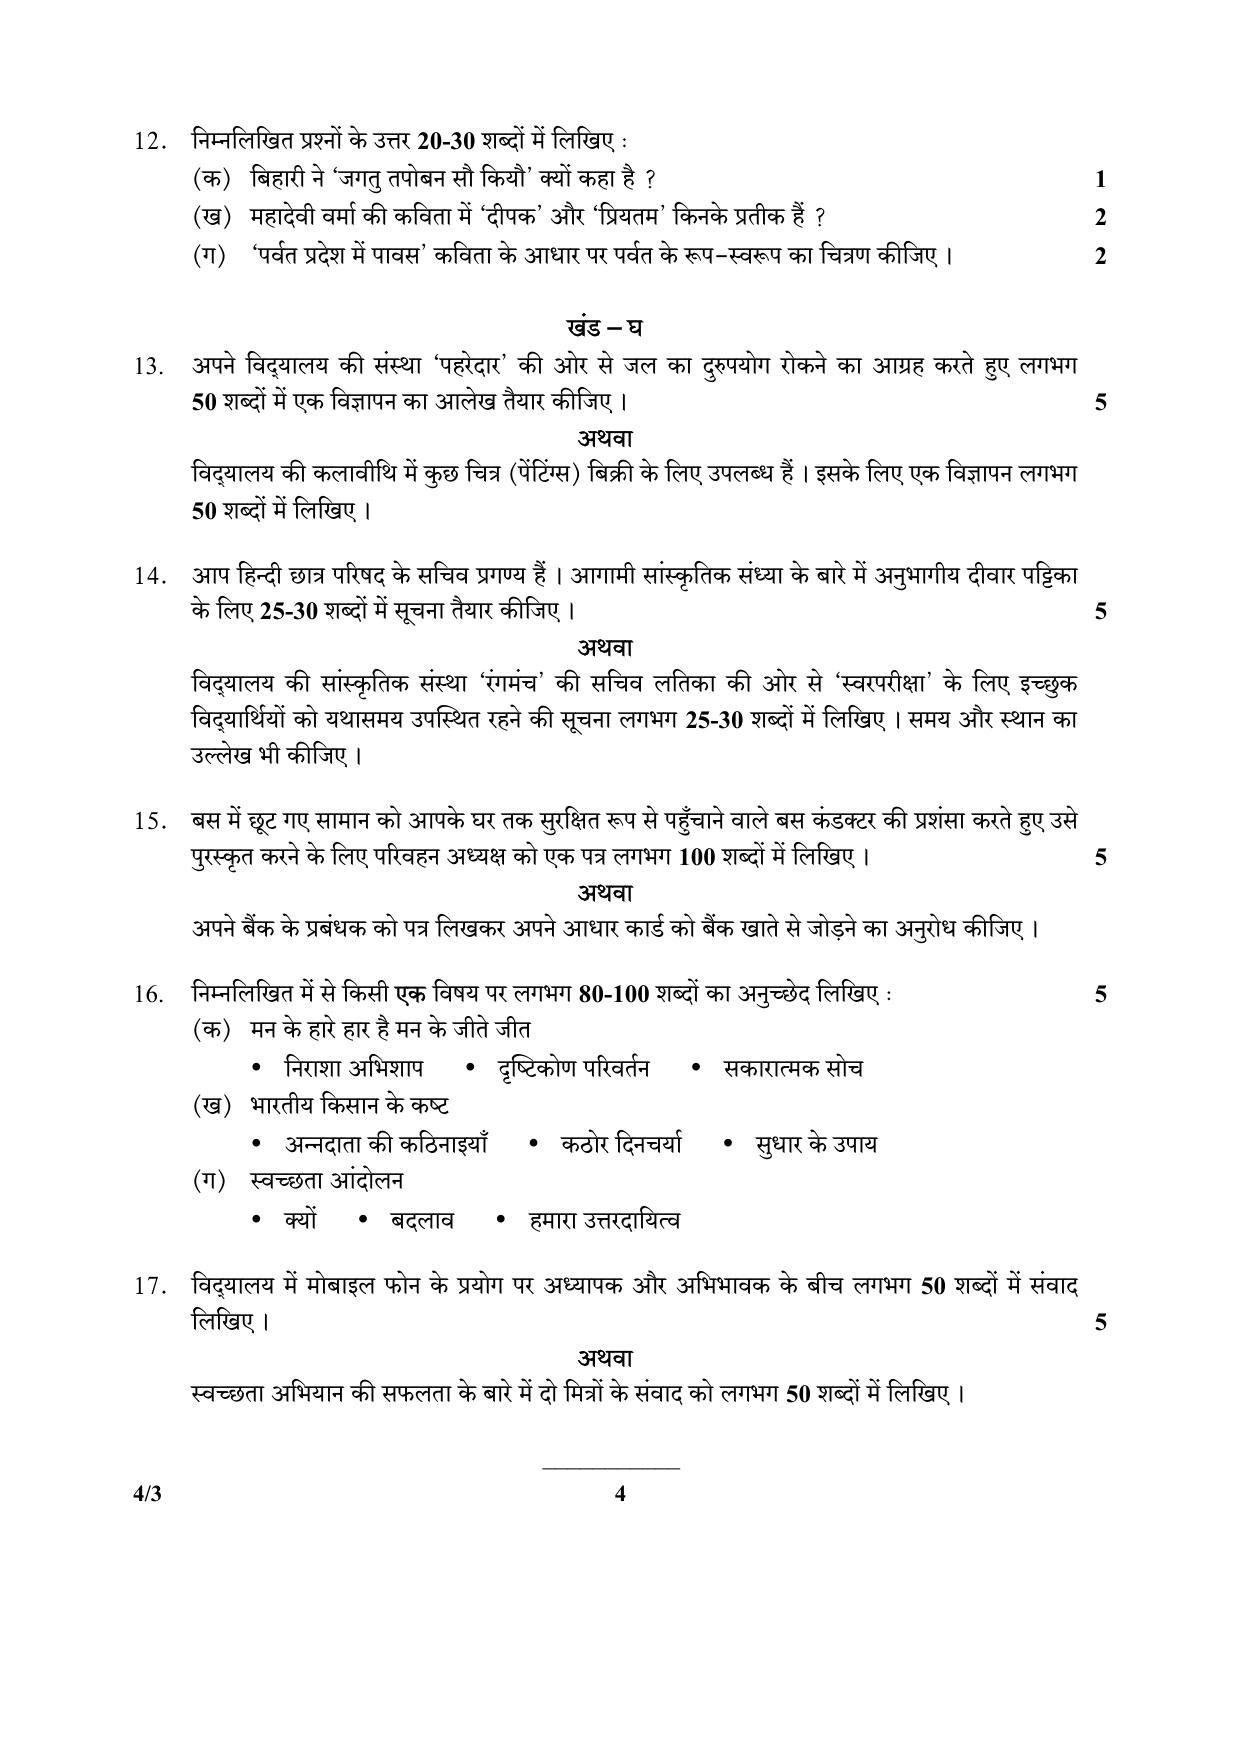 CBSE Class 10 4-3_Hindi SET-3 2018 Question Paper - Page 4